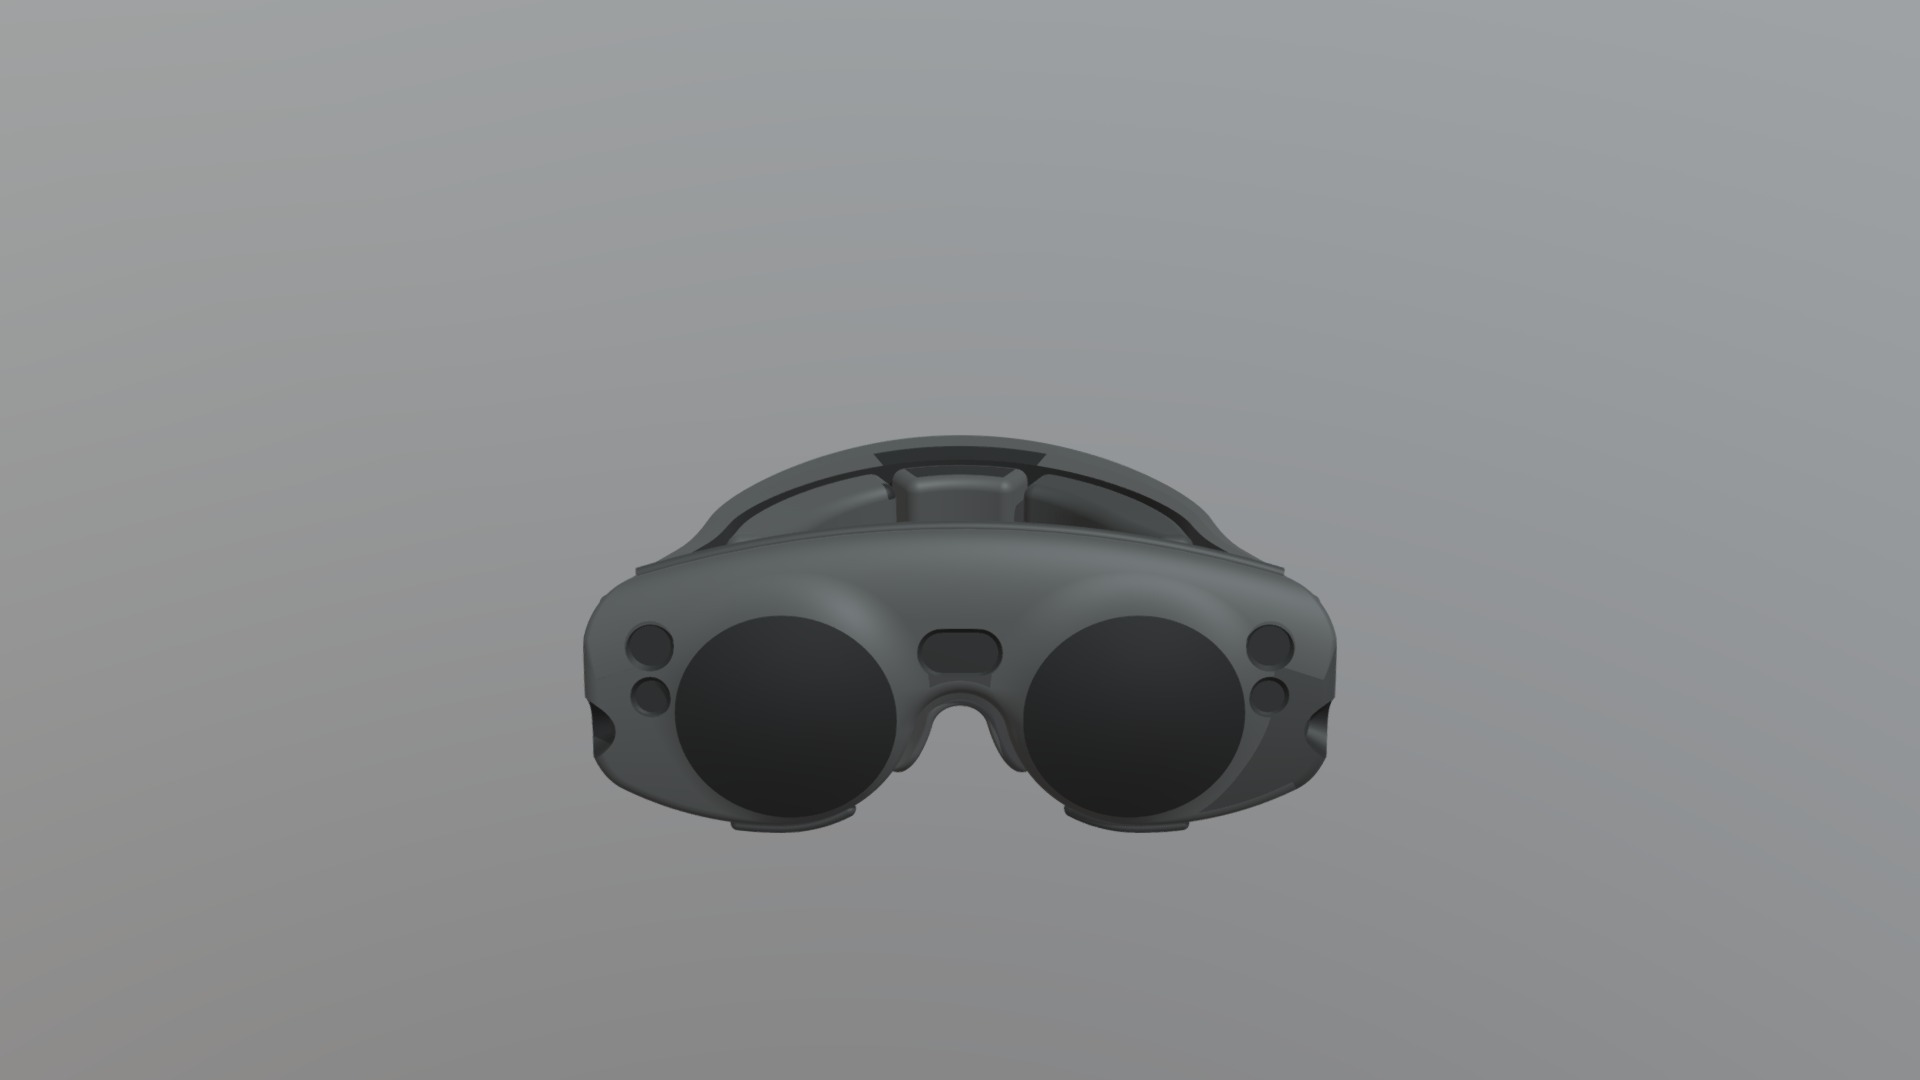 3D model Magic Leap One - This is a 3D model of the Magic Leap One. The 3D model is about a white car with a black rim.